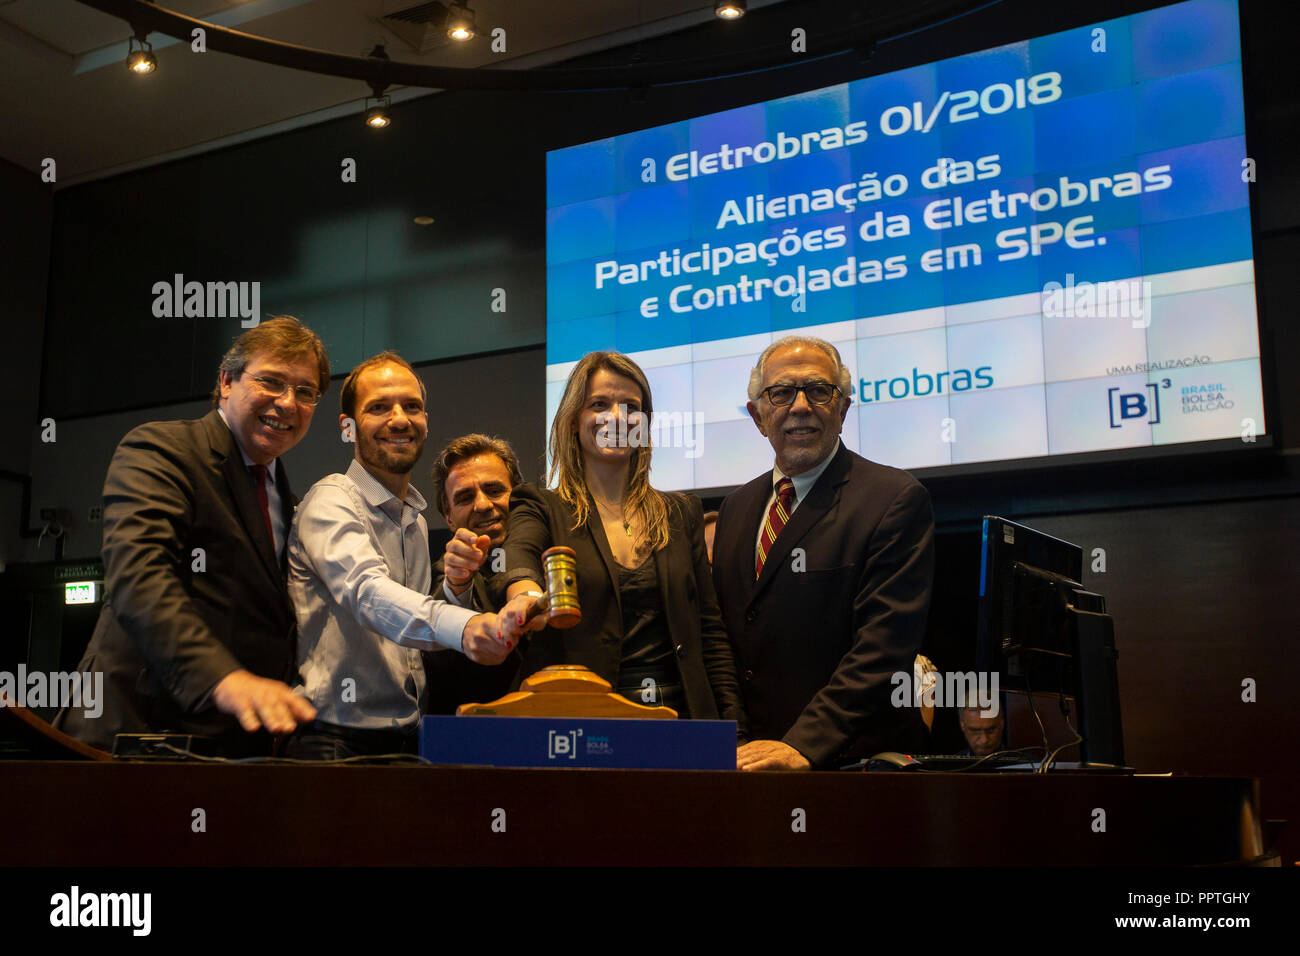 Sao Paulo, Brazil. 27th September 2018. Sale of shares of Eletrobas and Subsidiaries - Eletrobr's President Wilson Ferreira Jr, left during a hammer strike ceremony on Thursday 27th, at the headquarters of the Stock Exchange of the Sao Paulo Stock Exchange, B3, where the Eletrobras Holding Disposals Auction and Controlling Companies in a Specific Purpose Company, SPE, where wind power assets and transmission lines were sold, divided into 18 lots, of which 11 were sold, with a total minimum value of 3.1 billion reais, where Eletrobras collected 39 per center of the target value. According to th Stock Photo